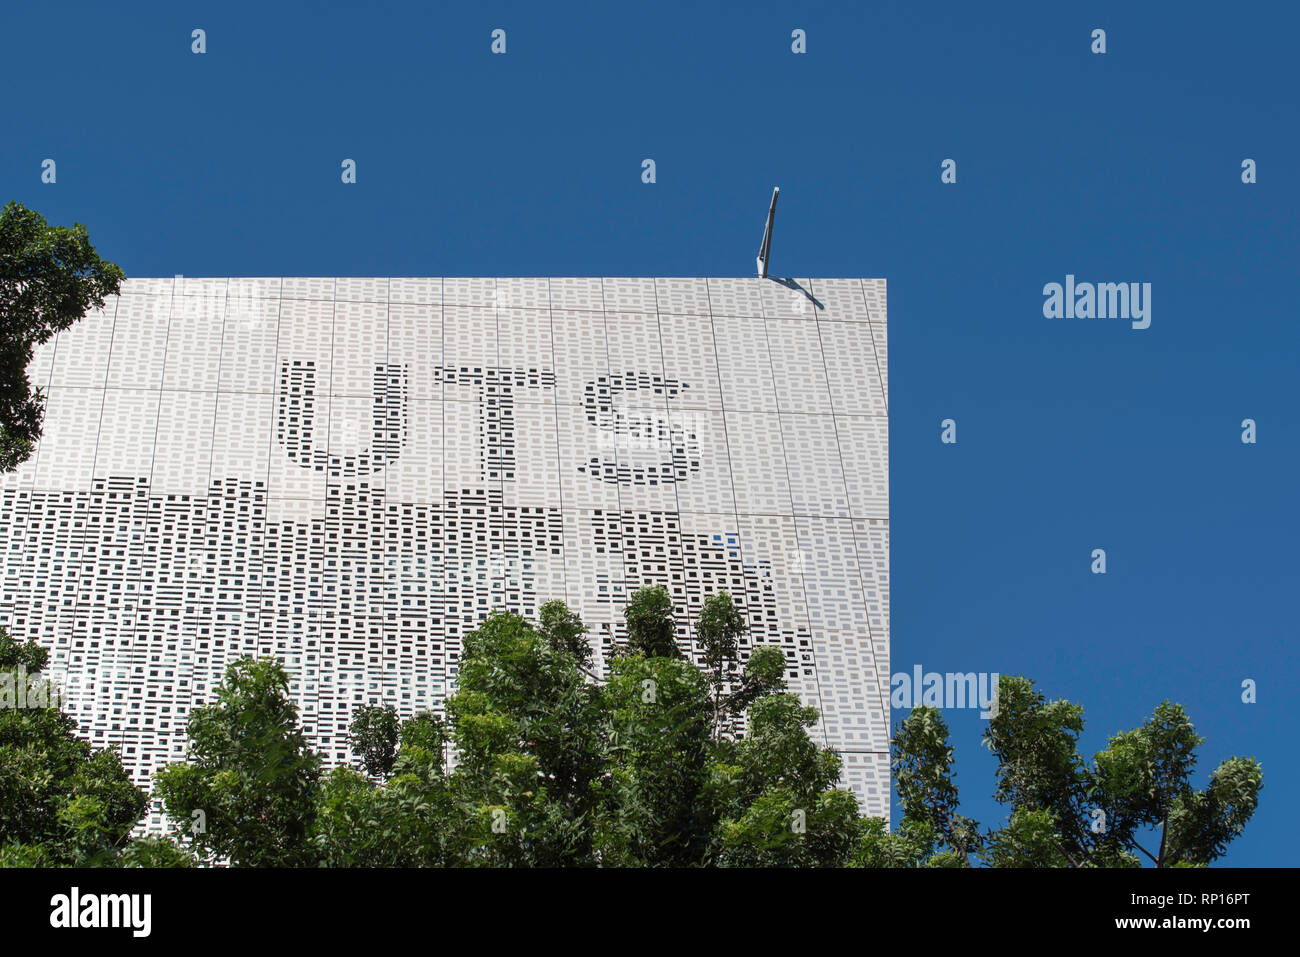 University of Technology Sydney Building 11, Faculty of Engineering and IT Building on Broadway is covered in an alloy binary screen of 1's and zeros Stock Photo